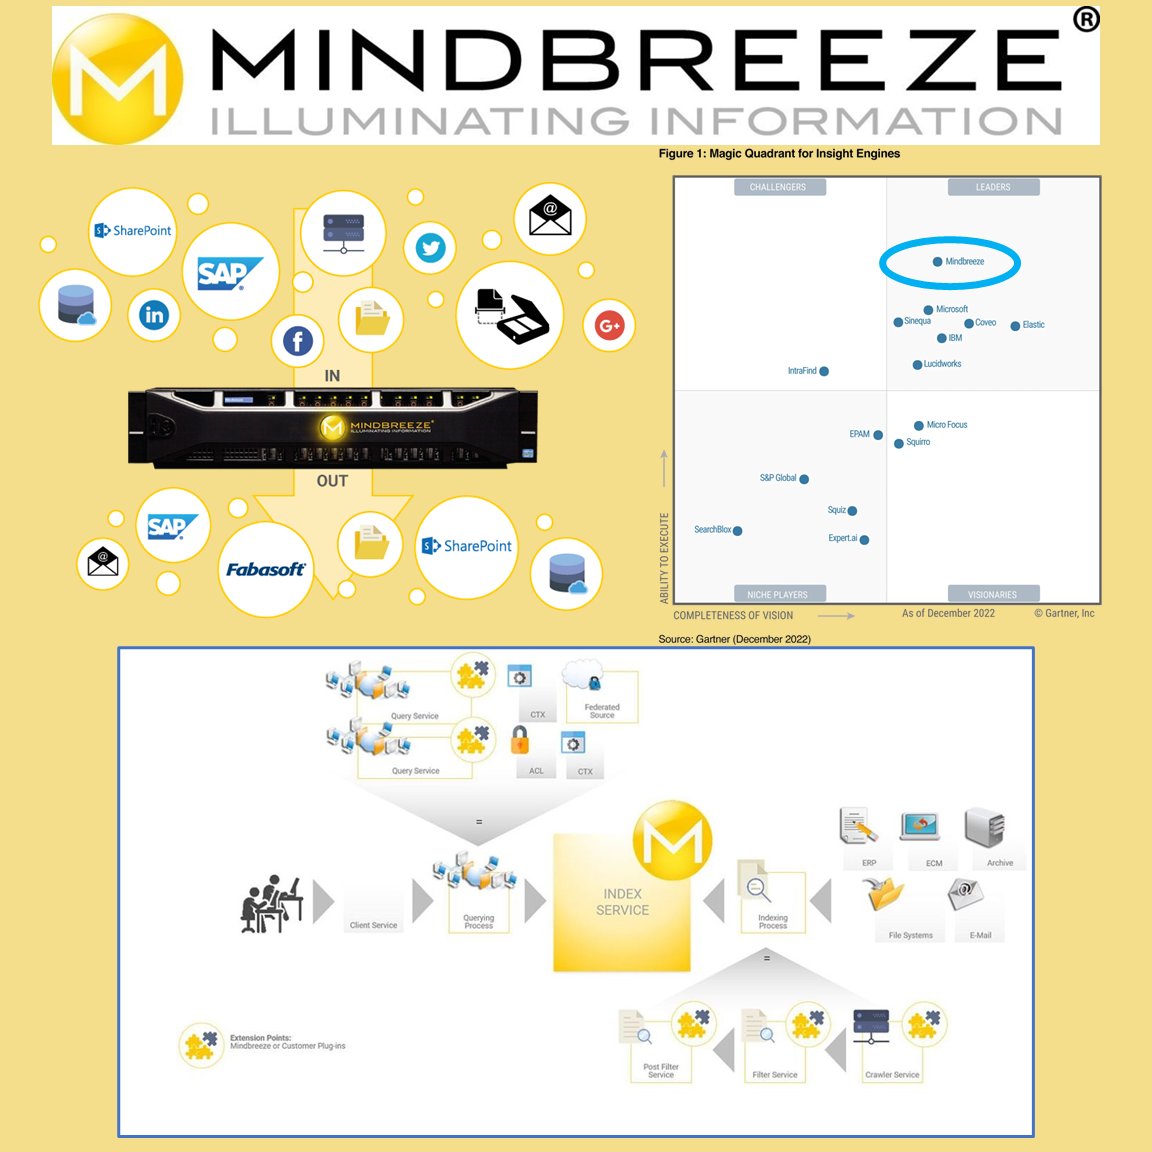 Learn about Insight Engines for #InsightsDiscovery and about the Mindbreeze InSpire Appliance at @Mindbreeze Academy: mindbreeze.com/academy?ls=22
————
#KnowledgeManagement #AI #BigData #LinkedData #KnowledgeGraph #Knowledgebase #Automation #Semantic #NLProc #DataStrategy #DataScience